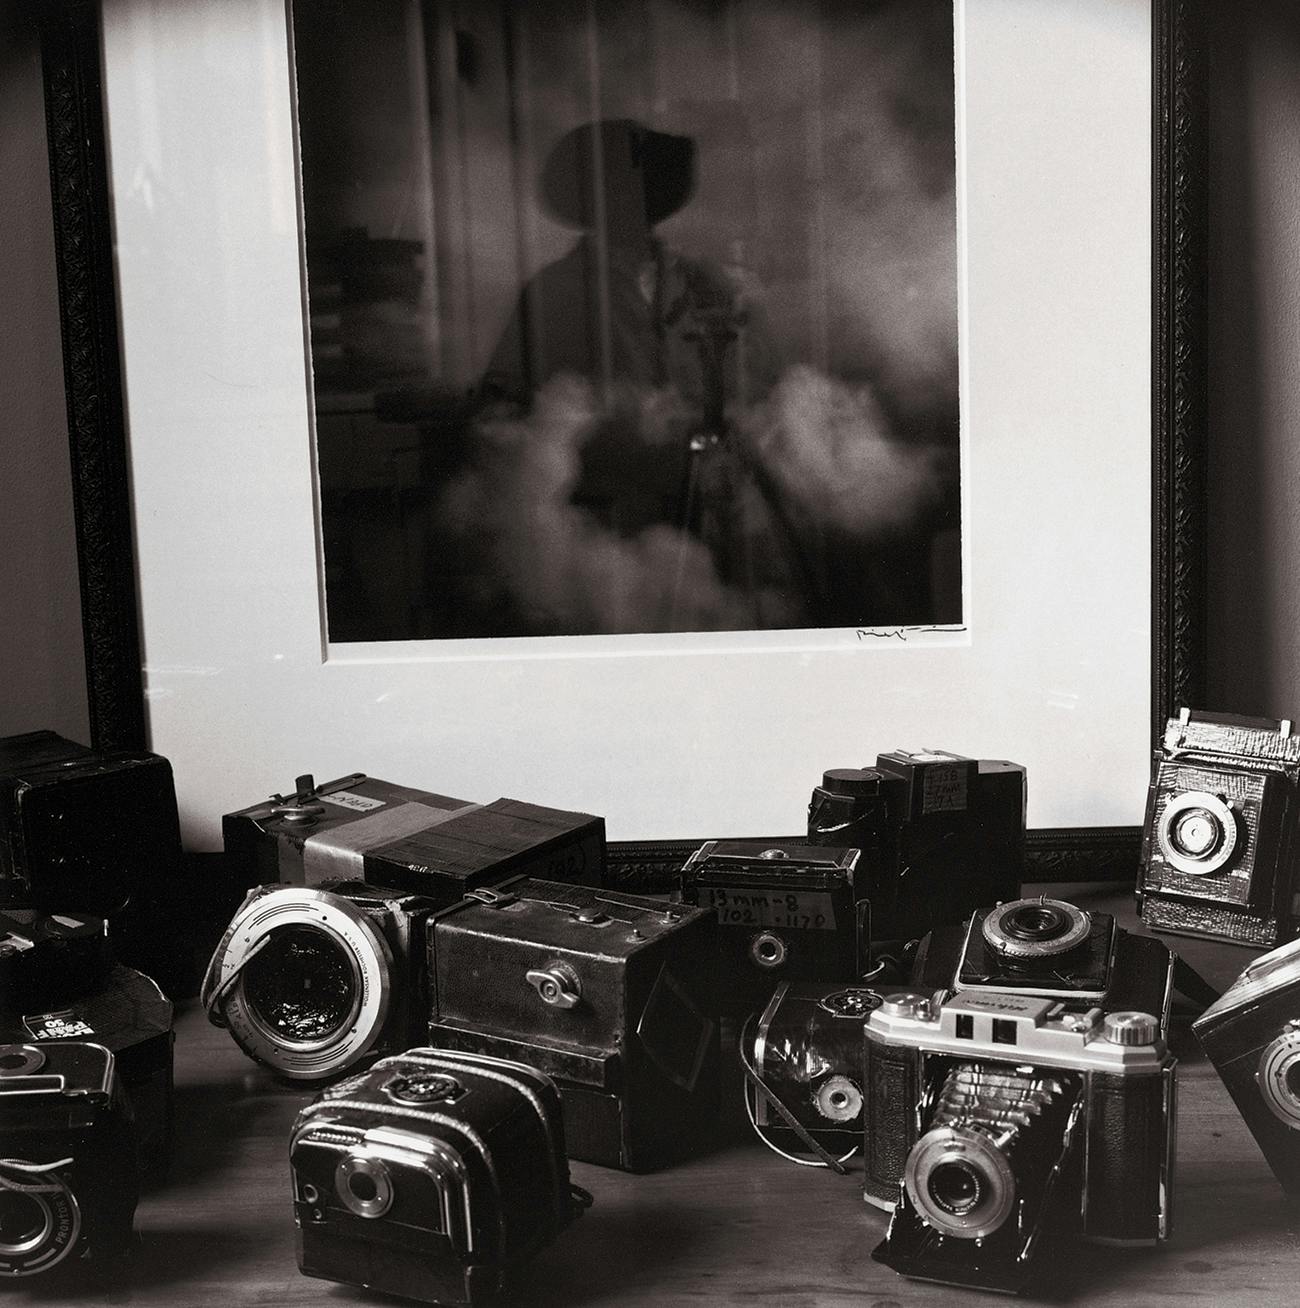 Wittliff rebuilt these cameras, replacing each lens with a pinhole punched in a piece of cheap pie pan; he calls the cameras tragaluces (“light swallowers”). Behind them is a tragaluz picture he took in Mexico titled Nubes ("Clouds"). "I was trying to find a way to see through my own eyes, and I'm kind of a retro guy, so I went back to one of the earliest forms of photography," he says. "It's just amazing what you can make a camera without a lens do."